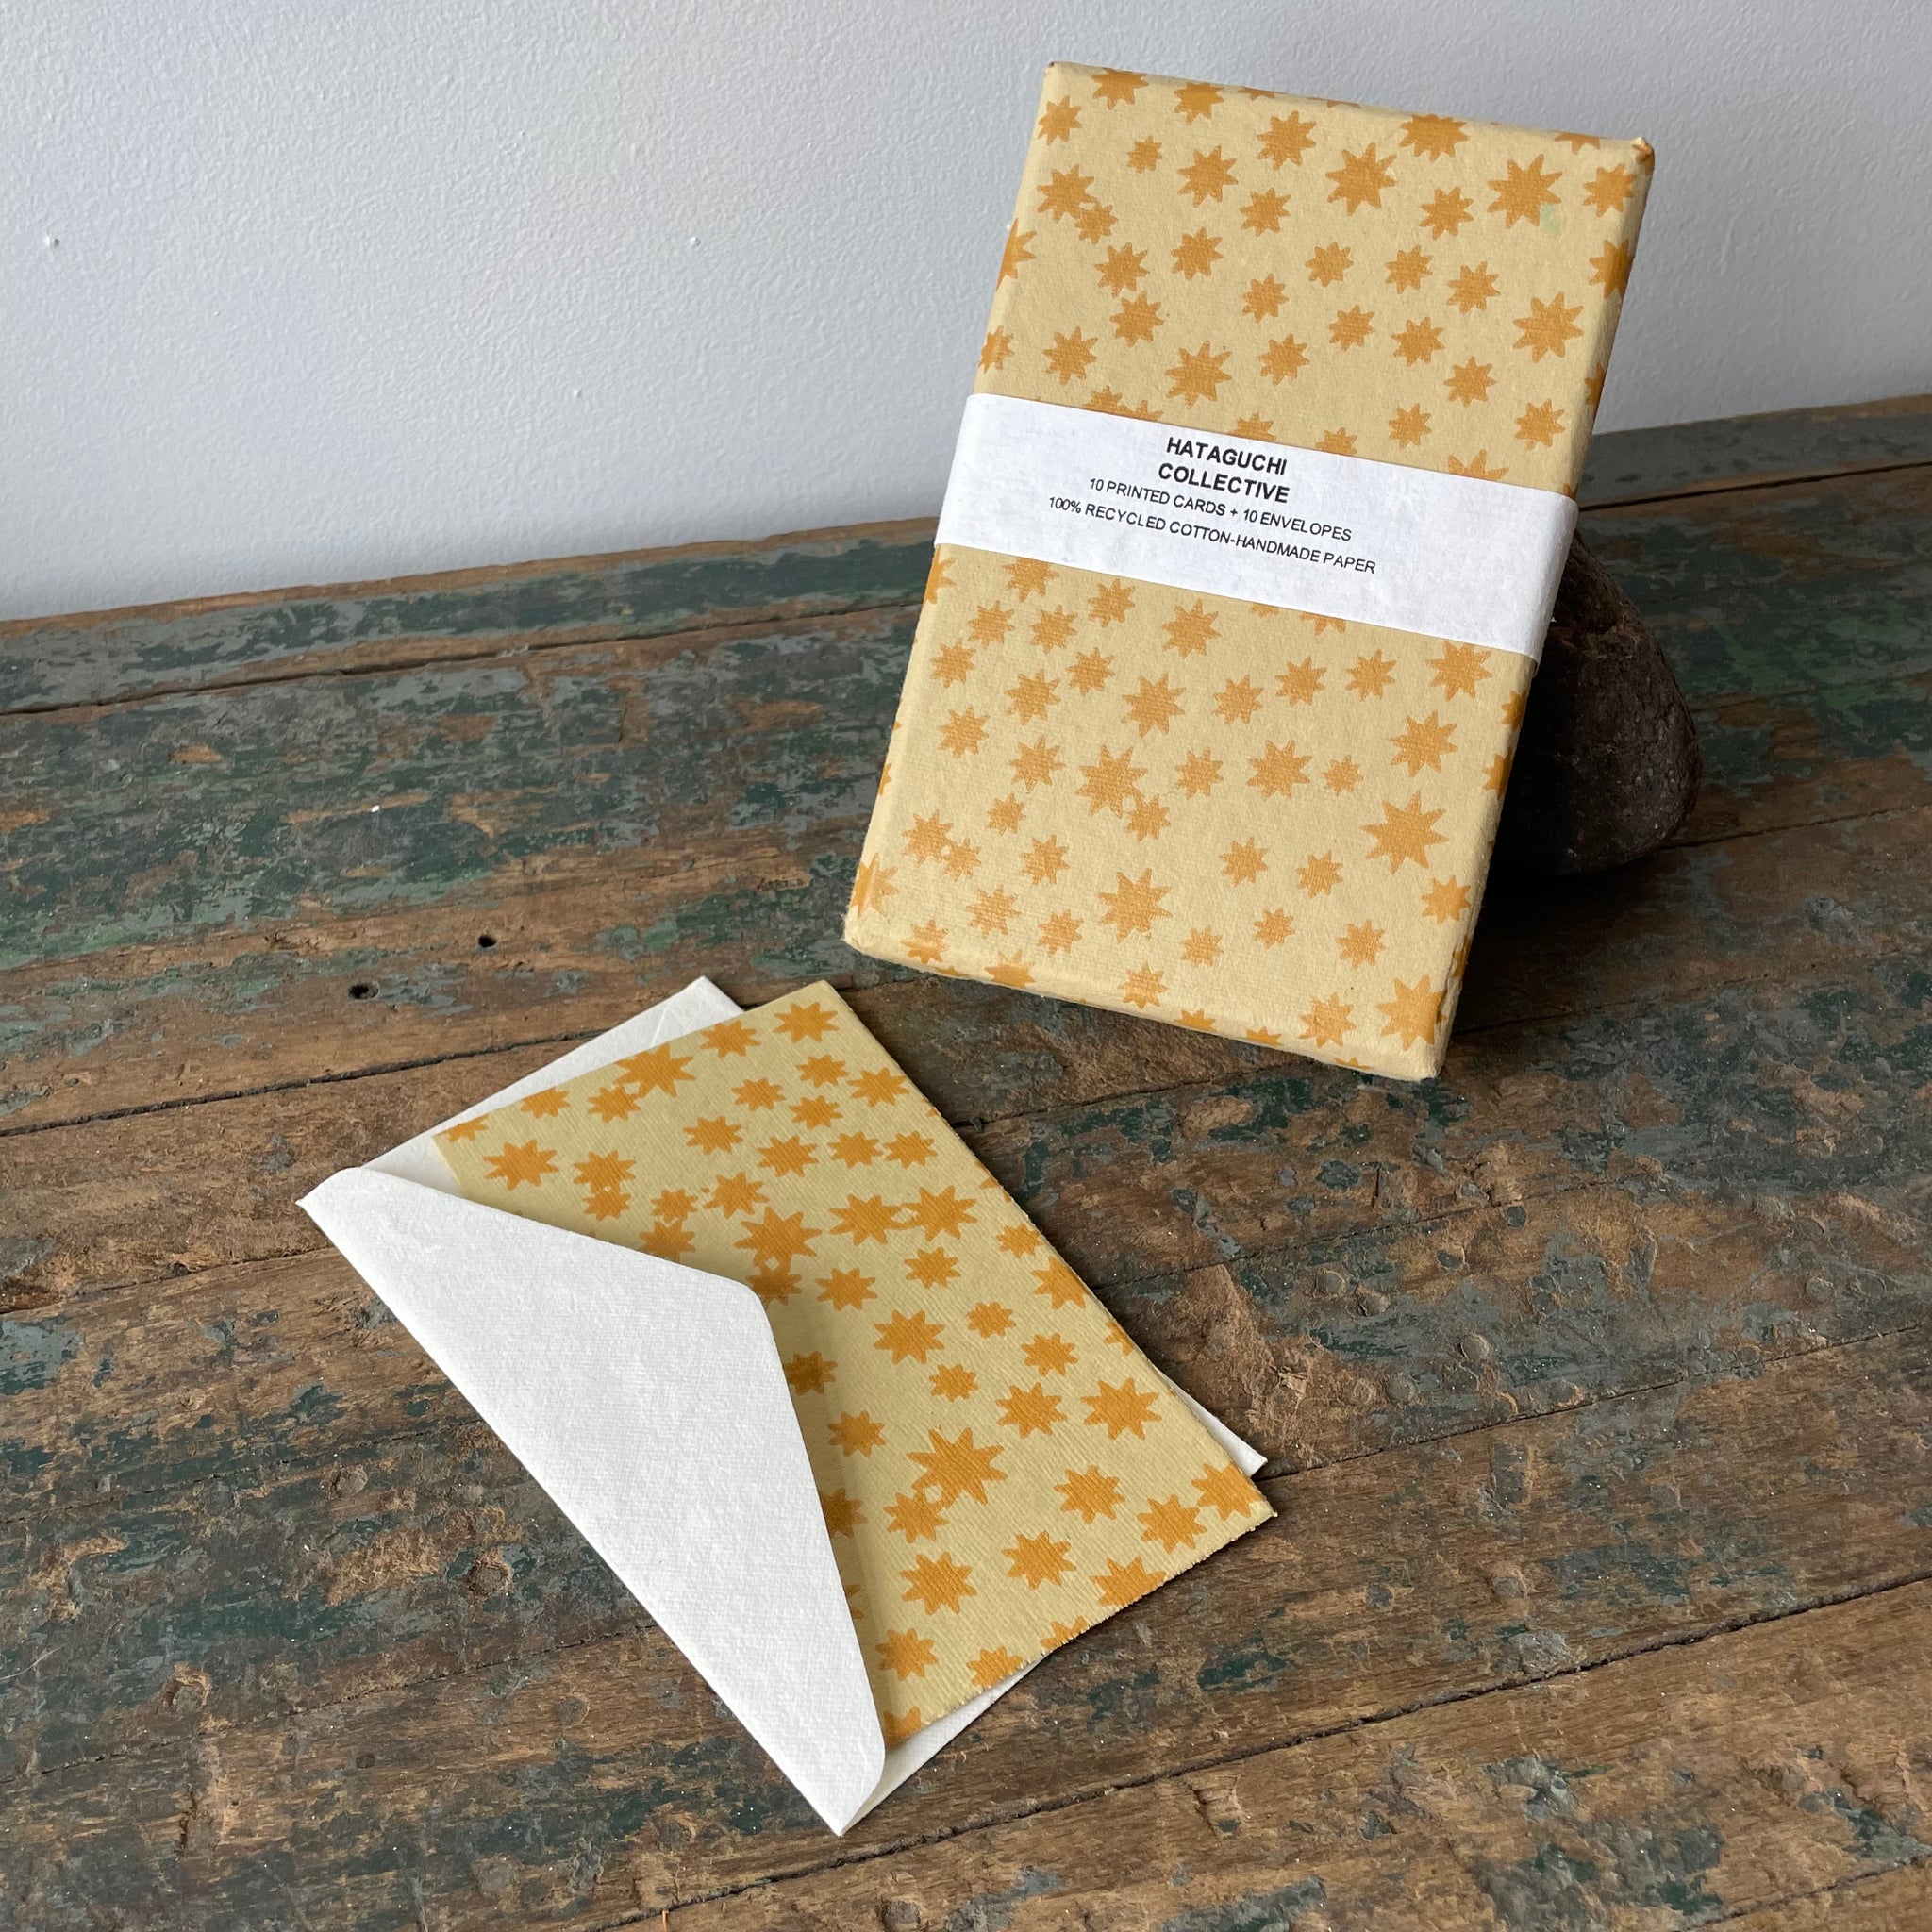 Hand Made Paper Stationery Set, in KONPEITO OATMILK By Hataguchi Collective